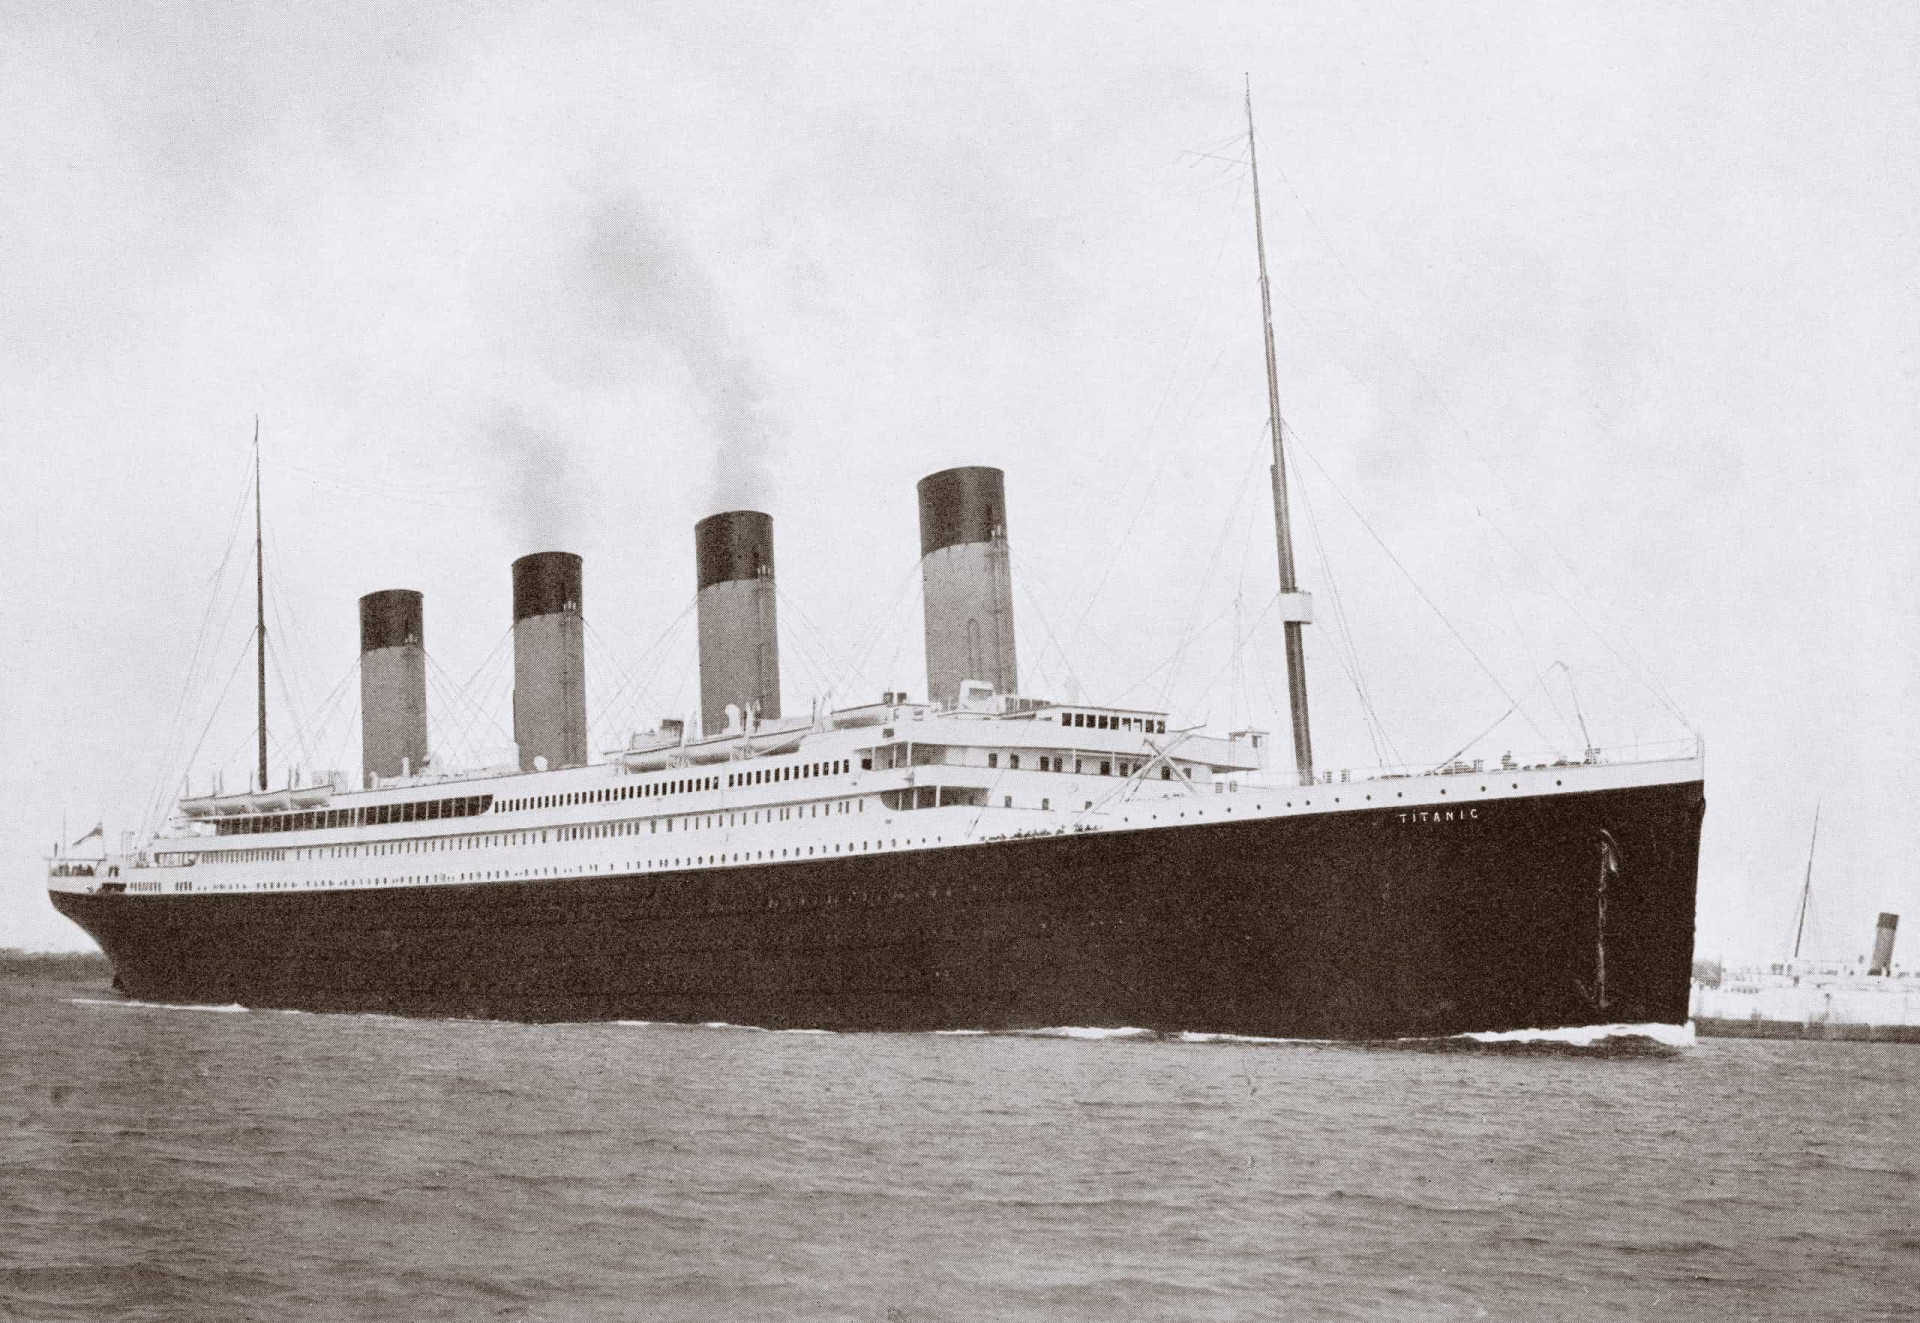 <p>On April 15, 1912, the British passenger liner RMS <em>Titanic</em> struck an iceberg and sank in the North Atlantic Ocean during her maiden voyage from Southampton to New York City. More than 1,500 people died in the tragedy. Operated by White Star, the loss of the <em>Titanic</em> remains the deadliest peacetime sinking of a superliner or cruise ship.</p><p>You may also like:<a href="https://www.starsinsider.com/n/387699?utm_source=msn.com&utm_medium=display&utm_campaign=referral_description&utm_content=502910v1en-ae"> The many faces of Dustin Hoffman</a></p>